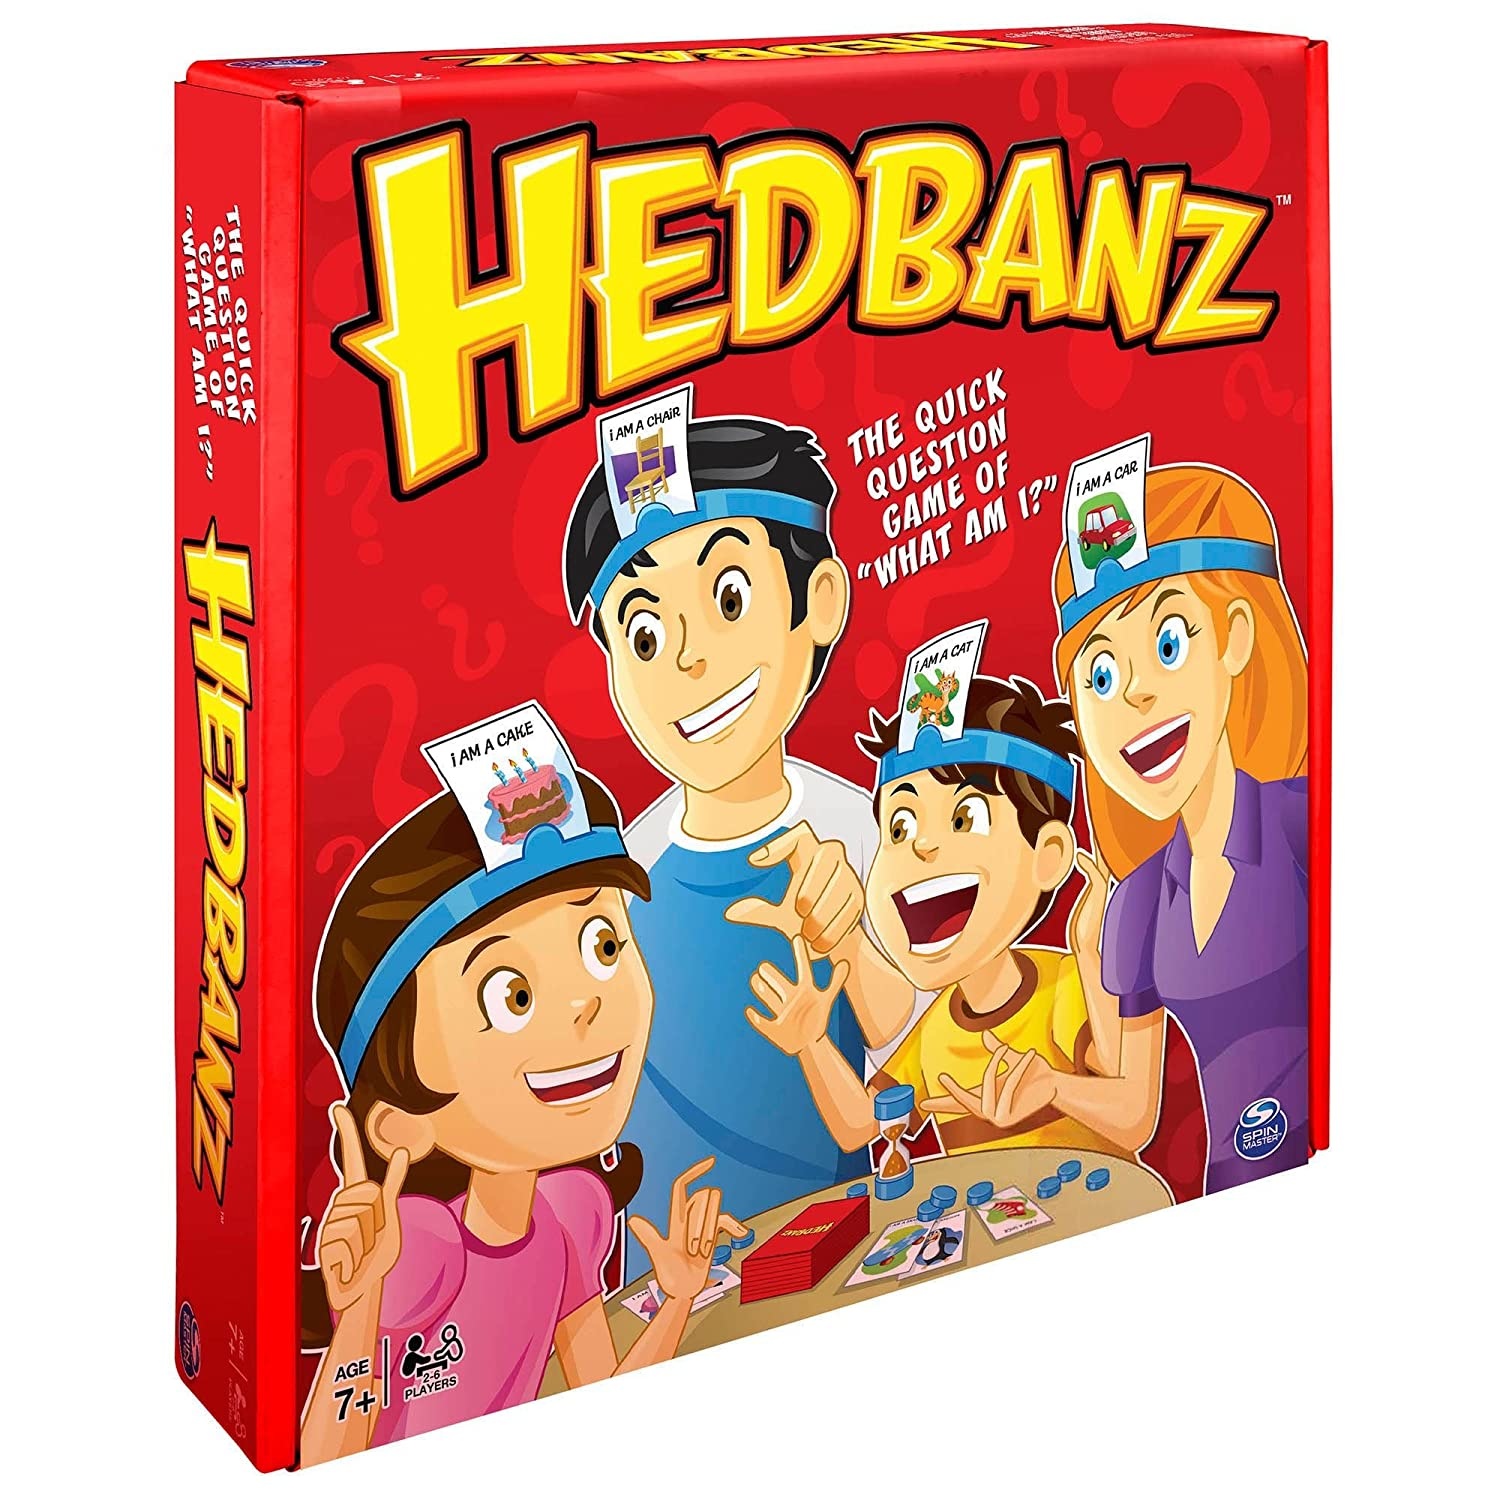  Spin Master Games Hedbanz, Harry Potter Wizarding